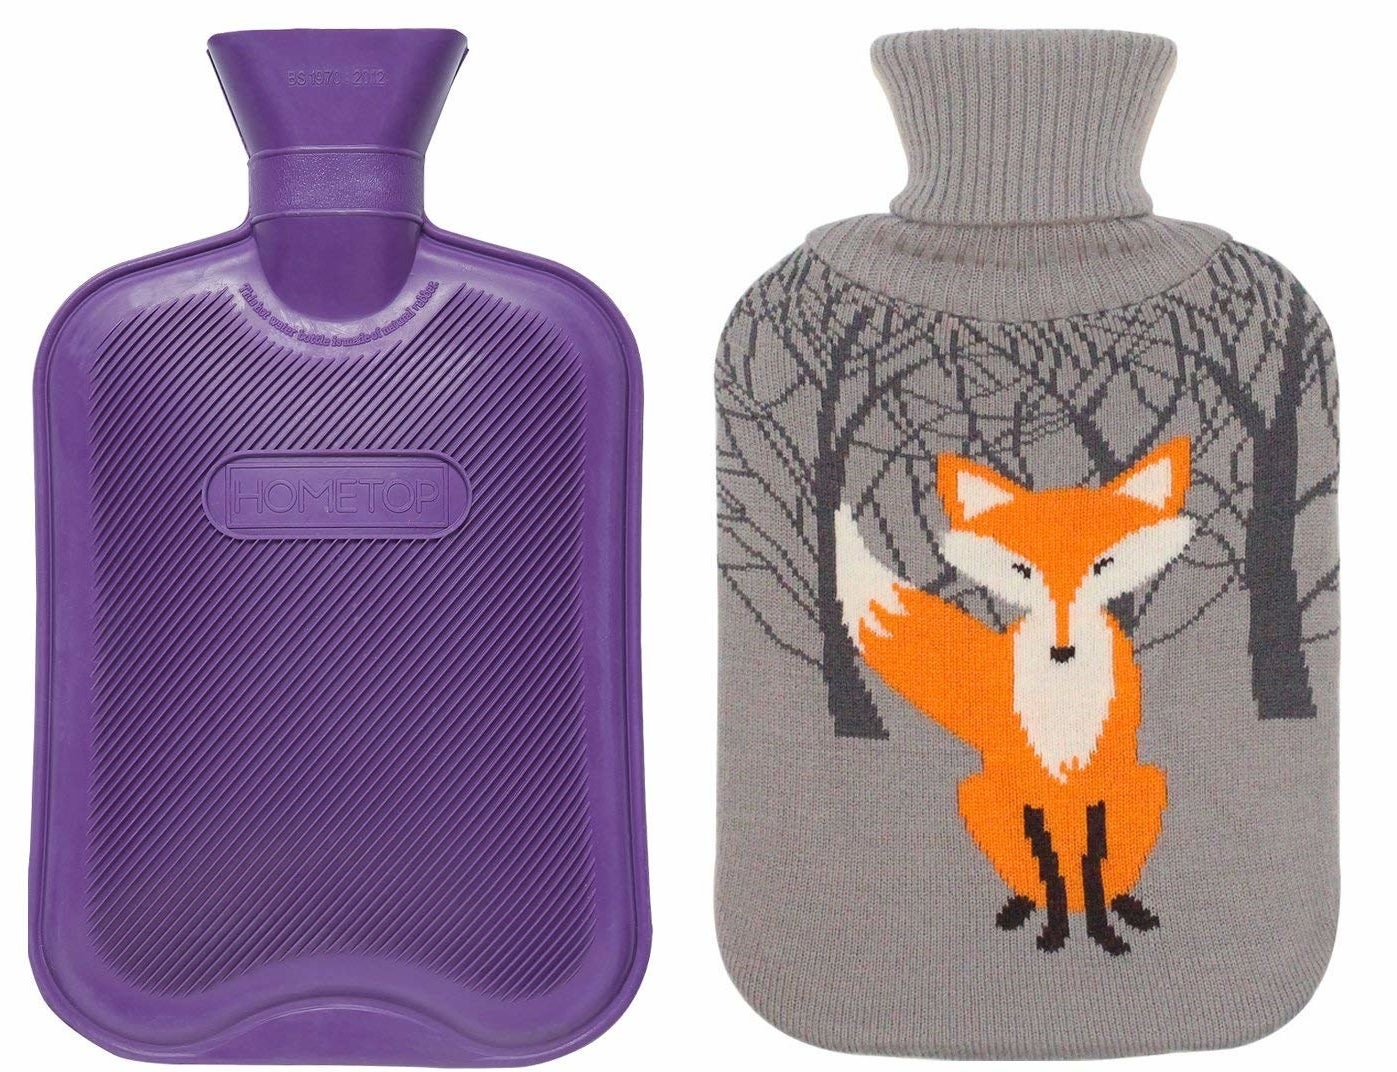 The purple hot water bottle with the grey knit cozy